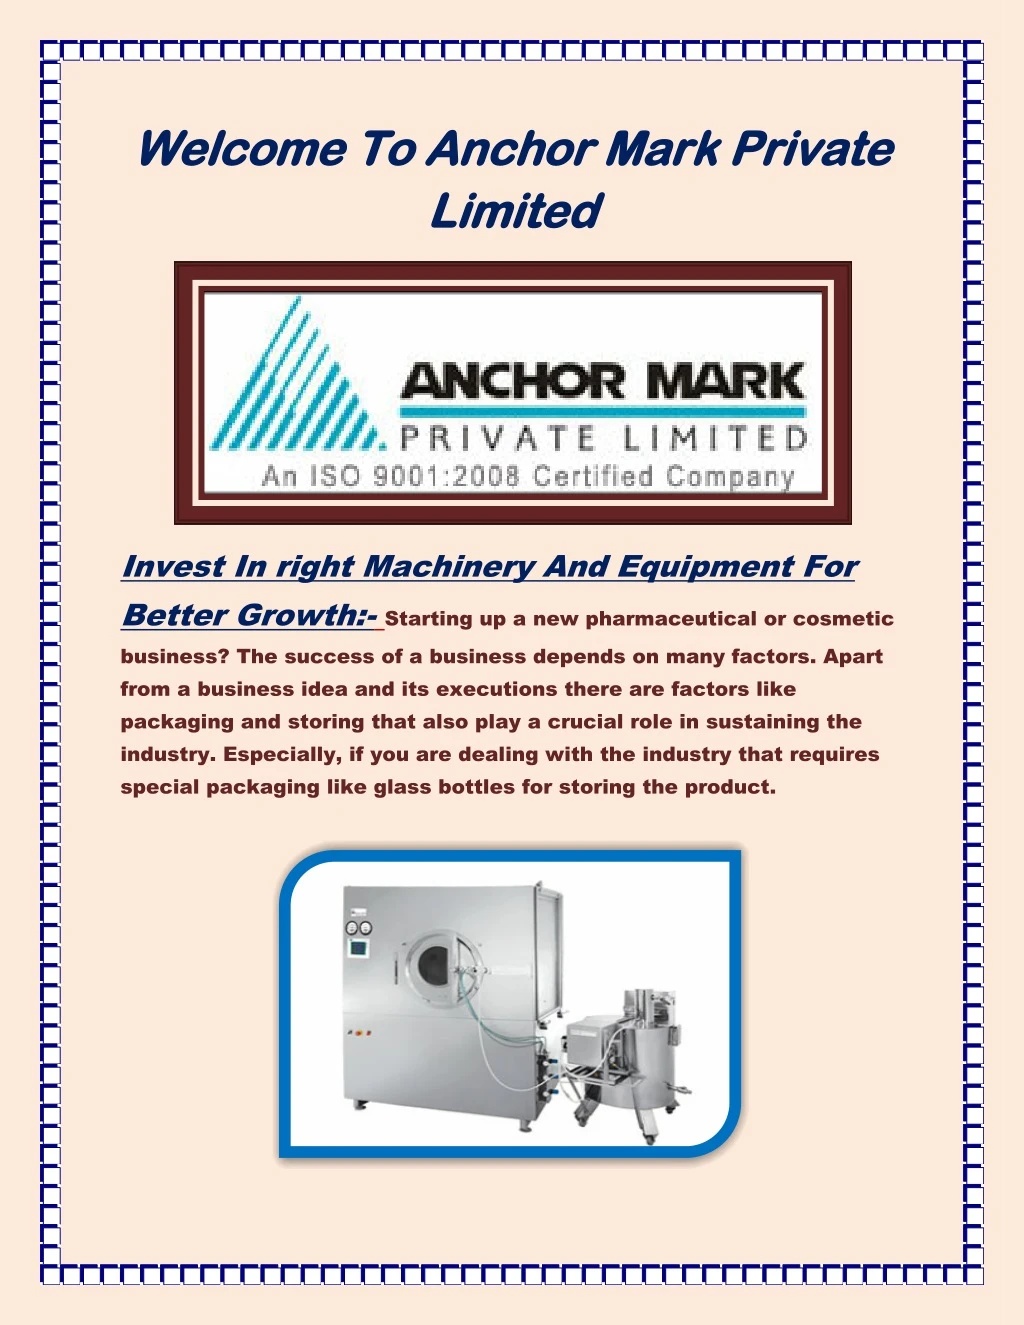 welcome to anchor mark private limited limited